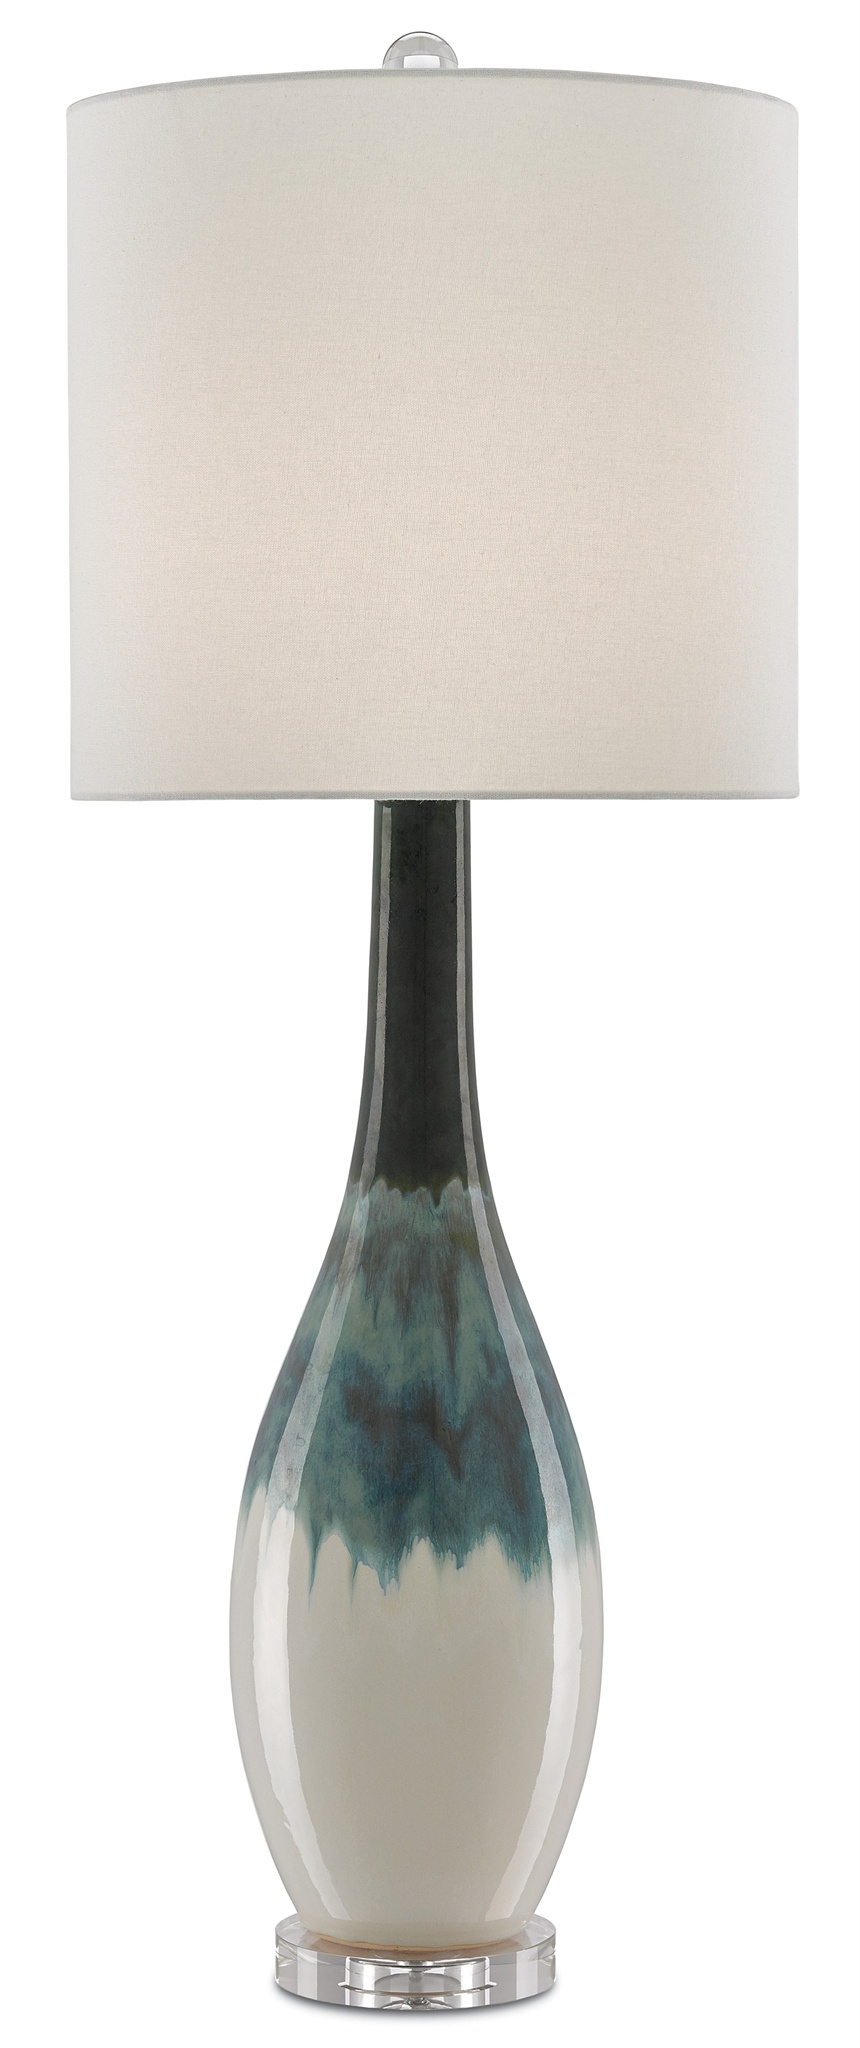 Rothko table lamp with a reflective glaze and cream base from Currey & Co. 